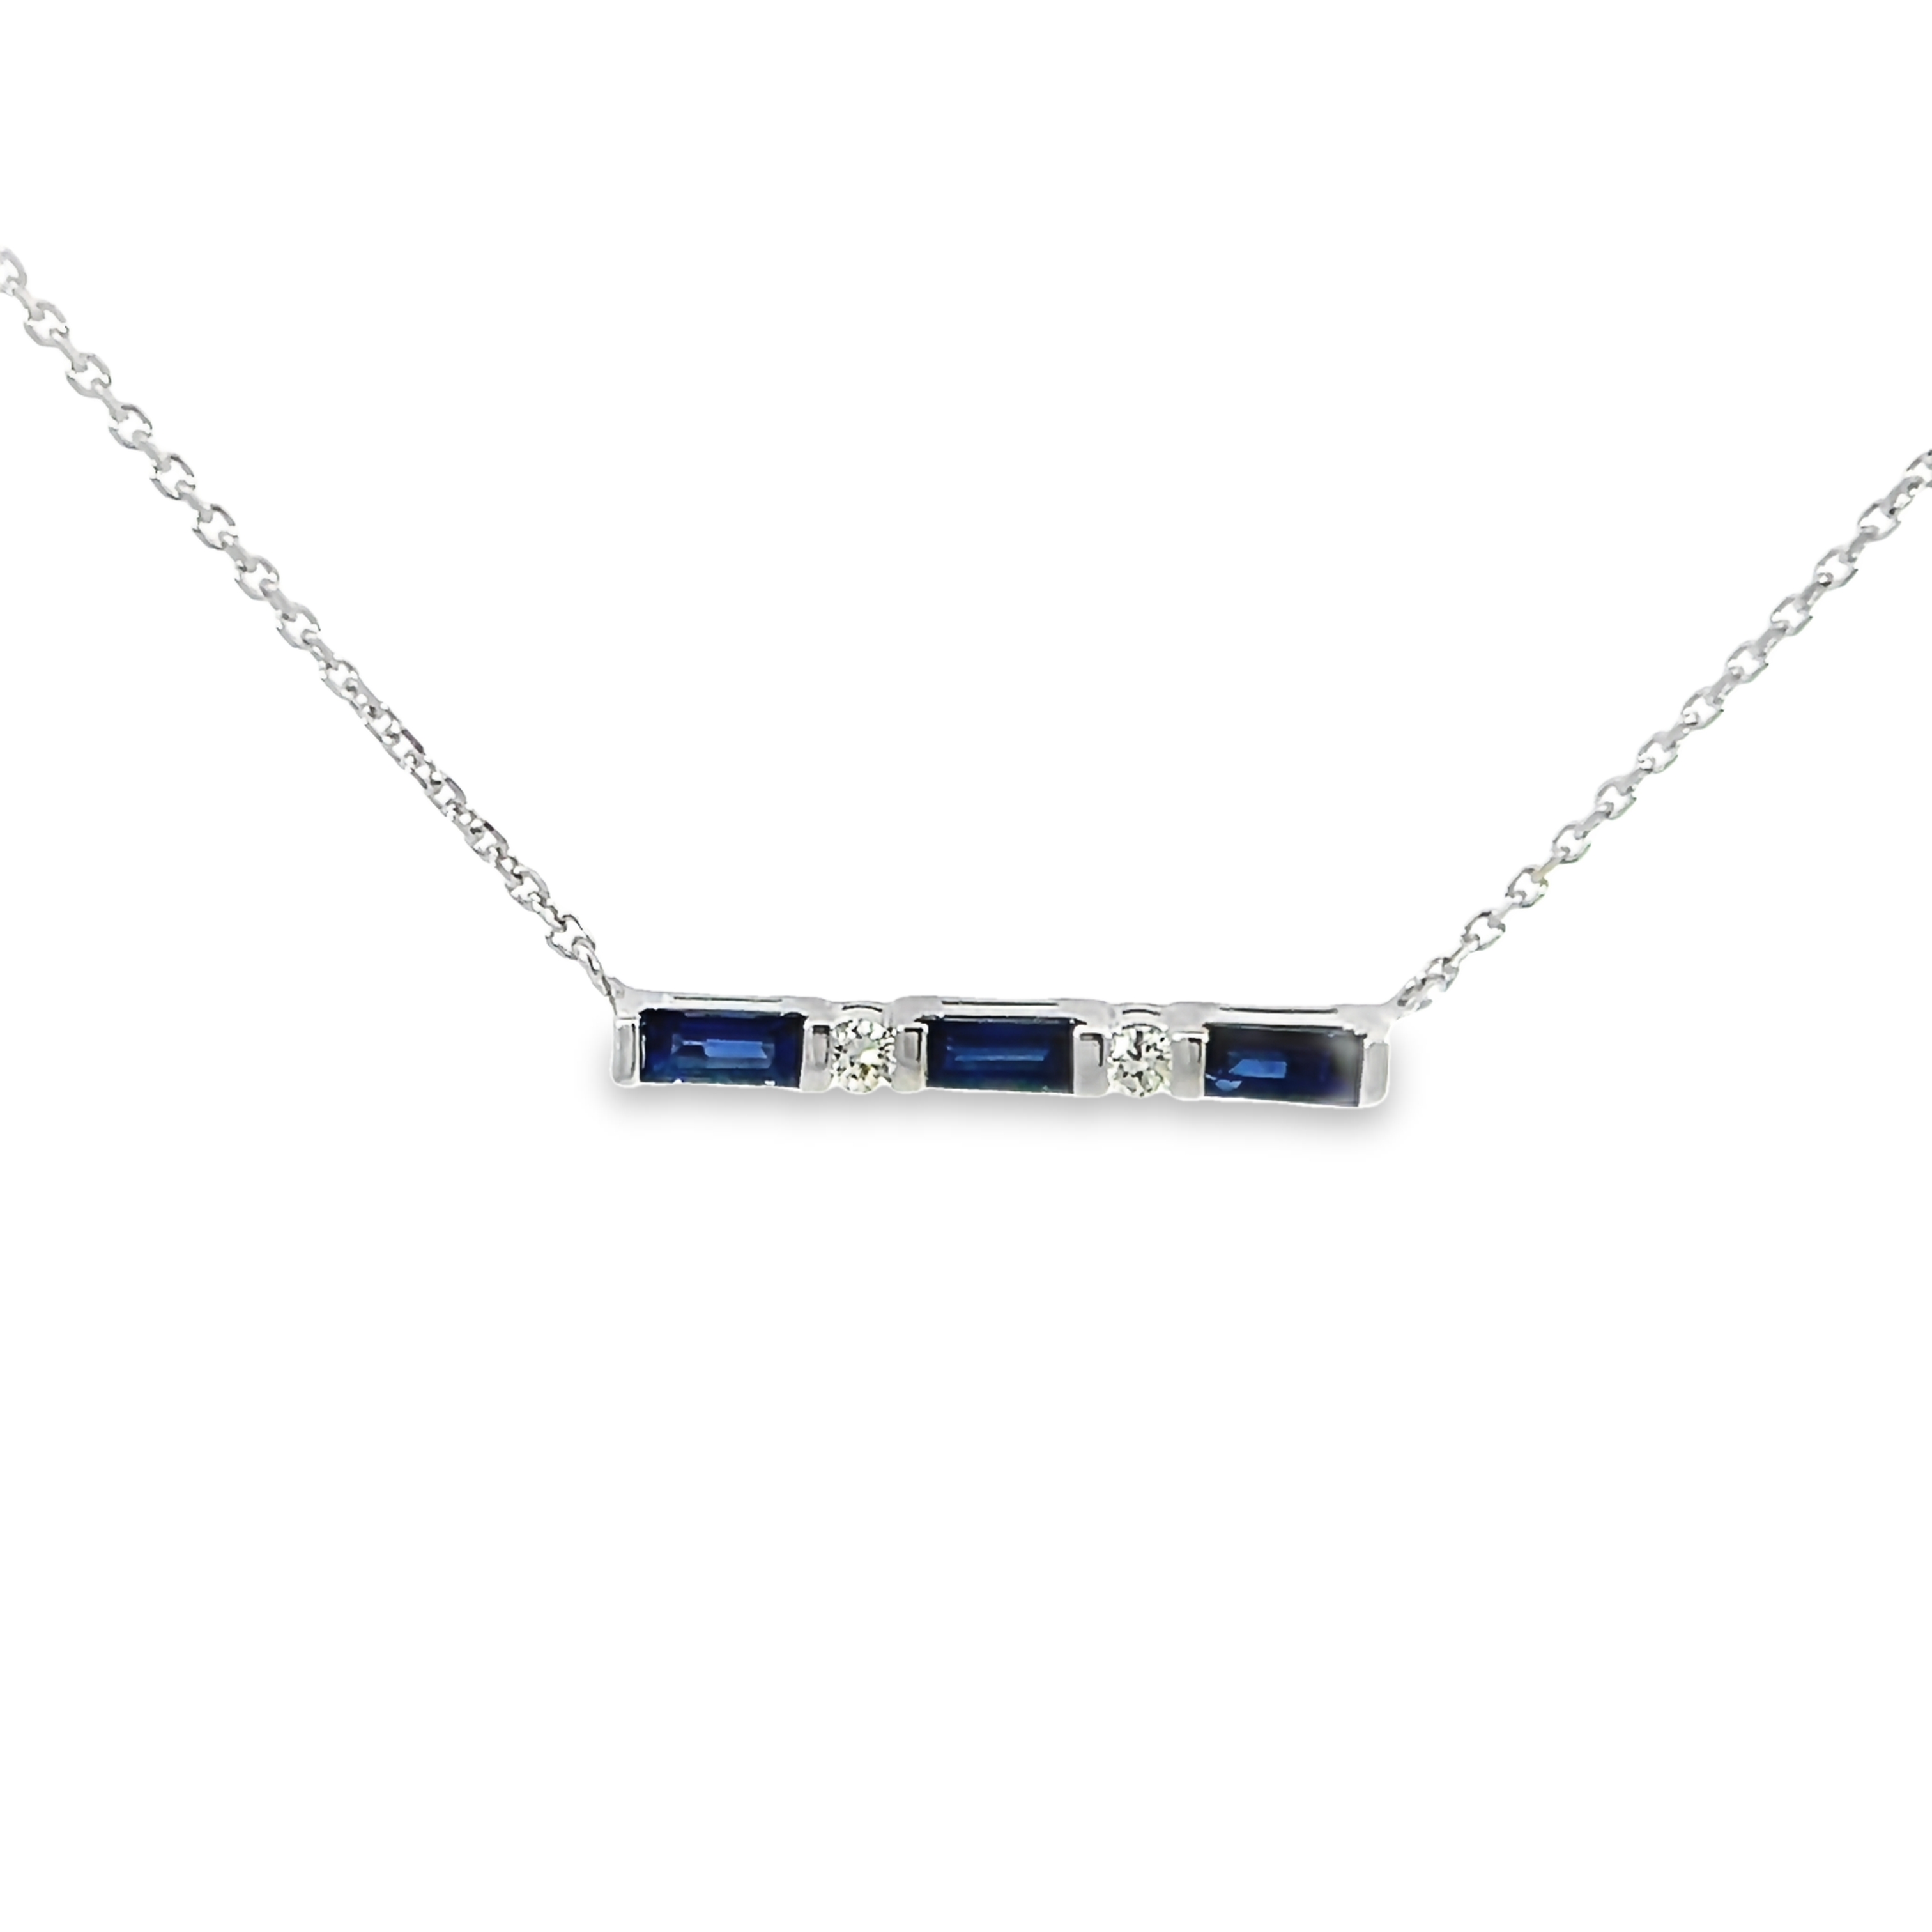 14k White Gold Sapphire And Diamond Bar Necklace